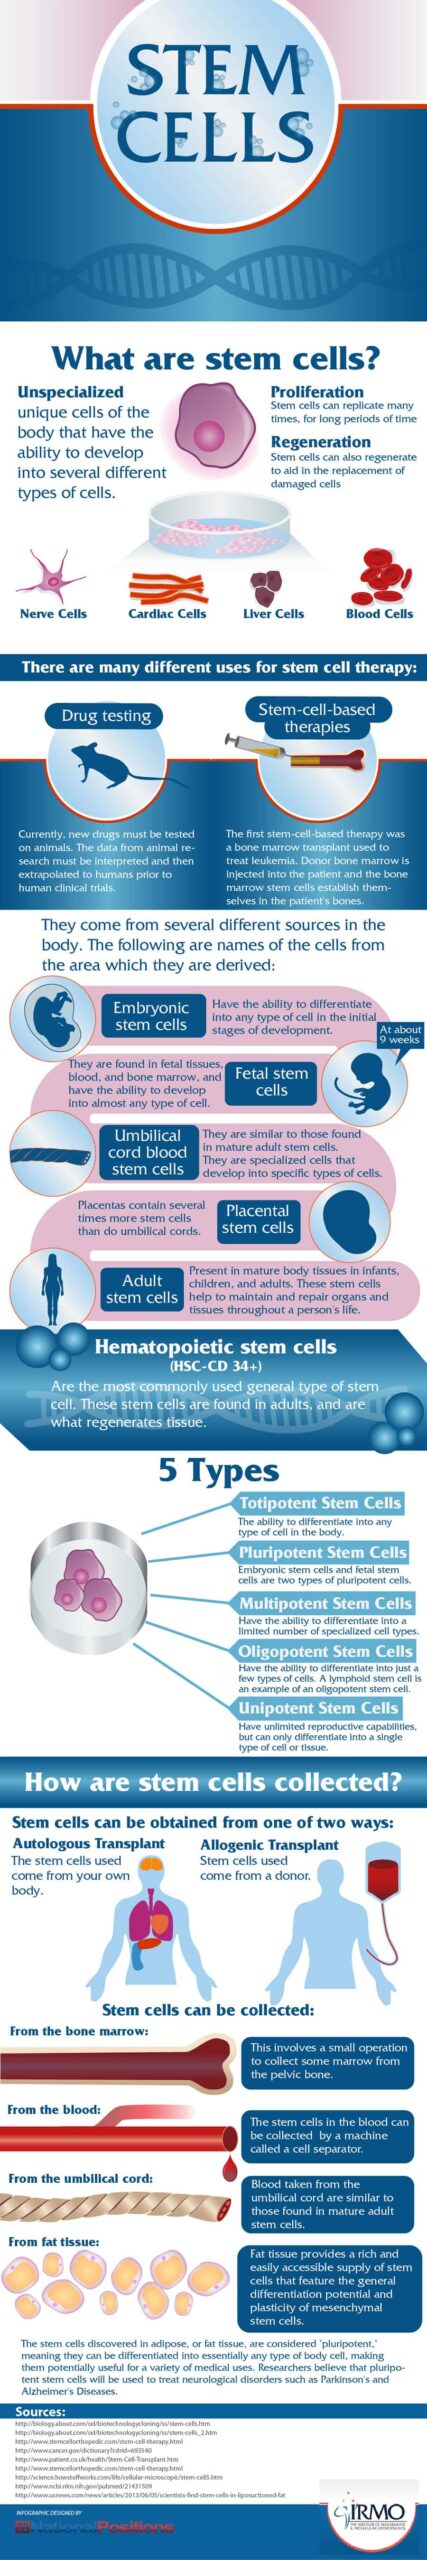 Infographic: Combo Method of Stem Cell Generation | The Scientist Magazine